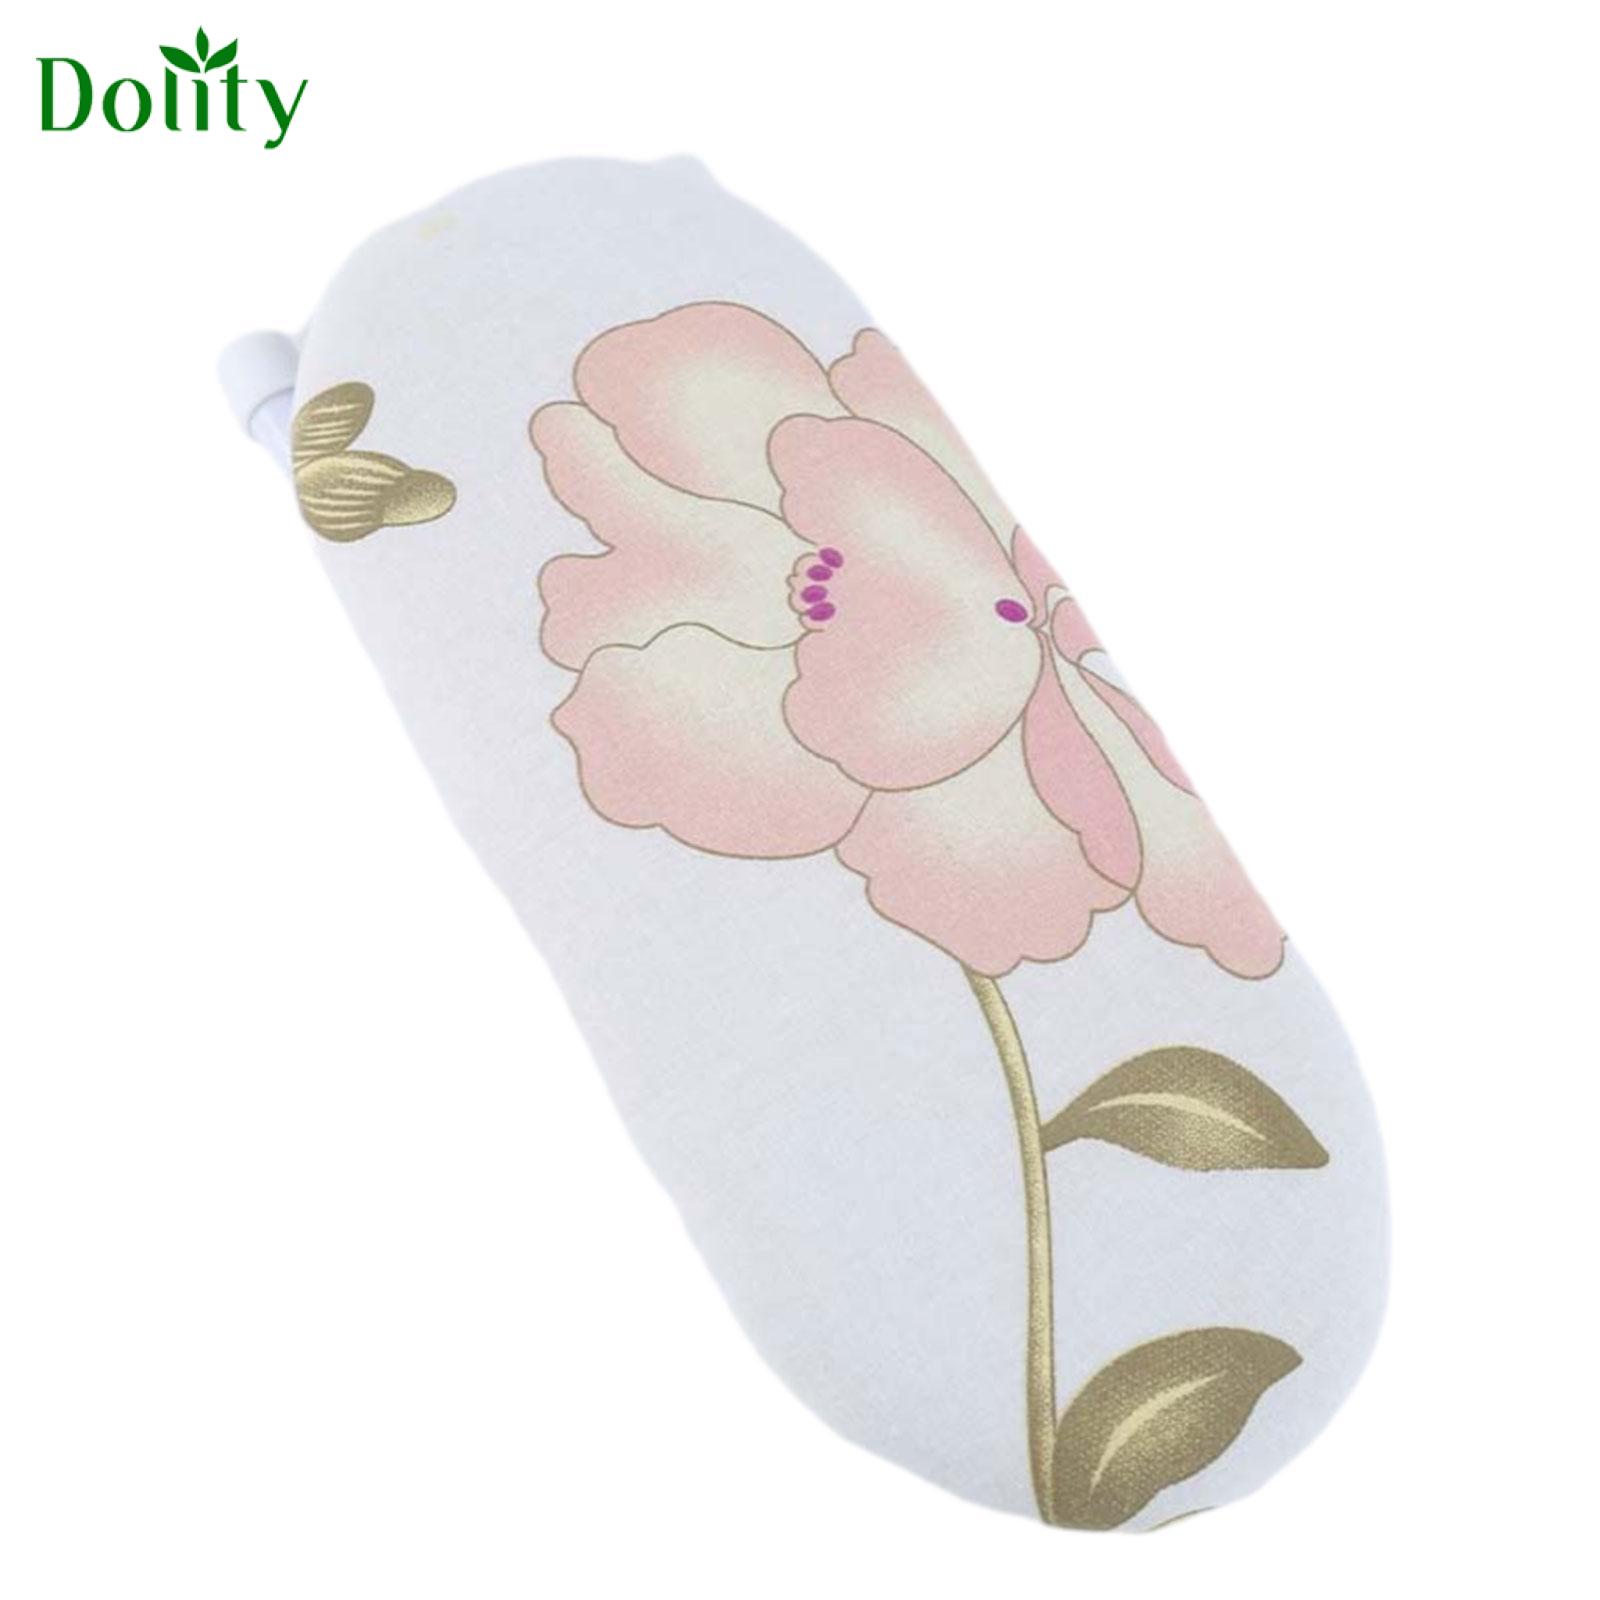 Dolity Mini Ironing Board Countertop Iron Board for Sewing Room Household